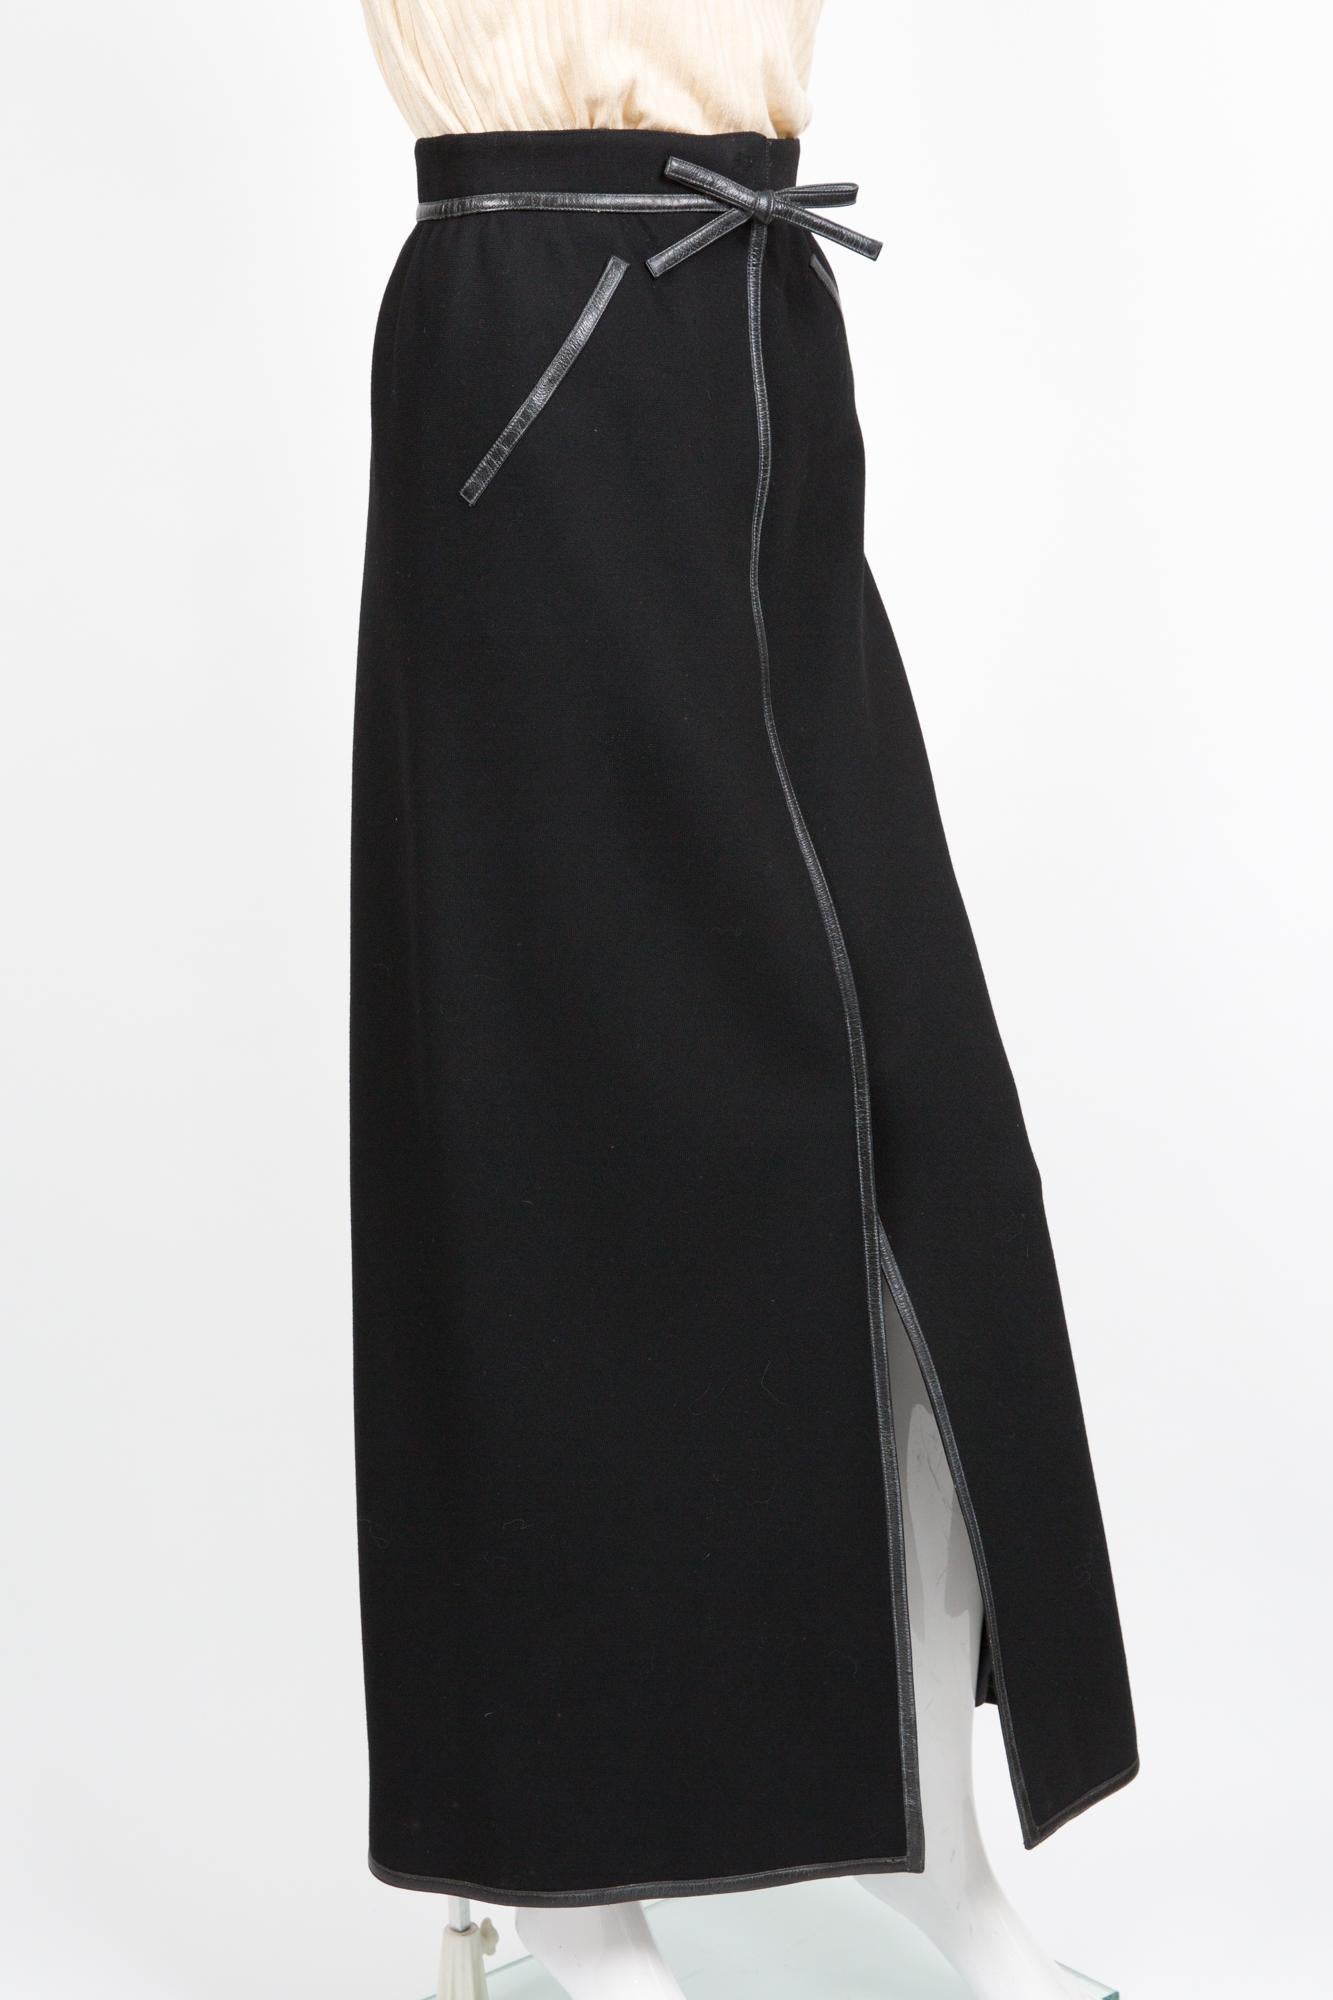 Women's 1974-75 Courreges Couture Future Numbered D000651  Black Wool Skirt